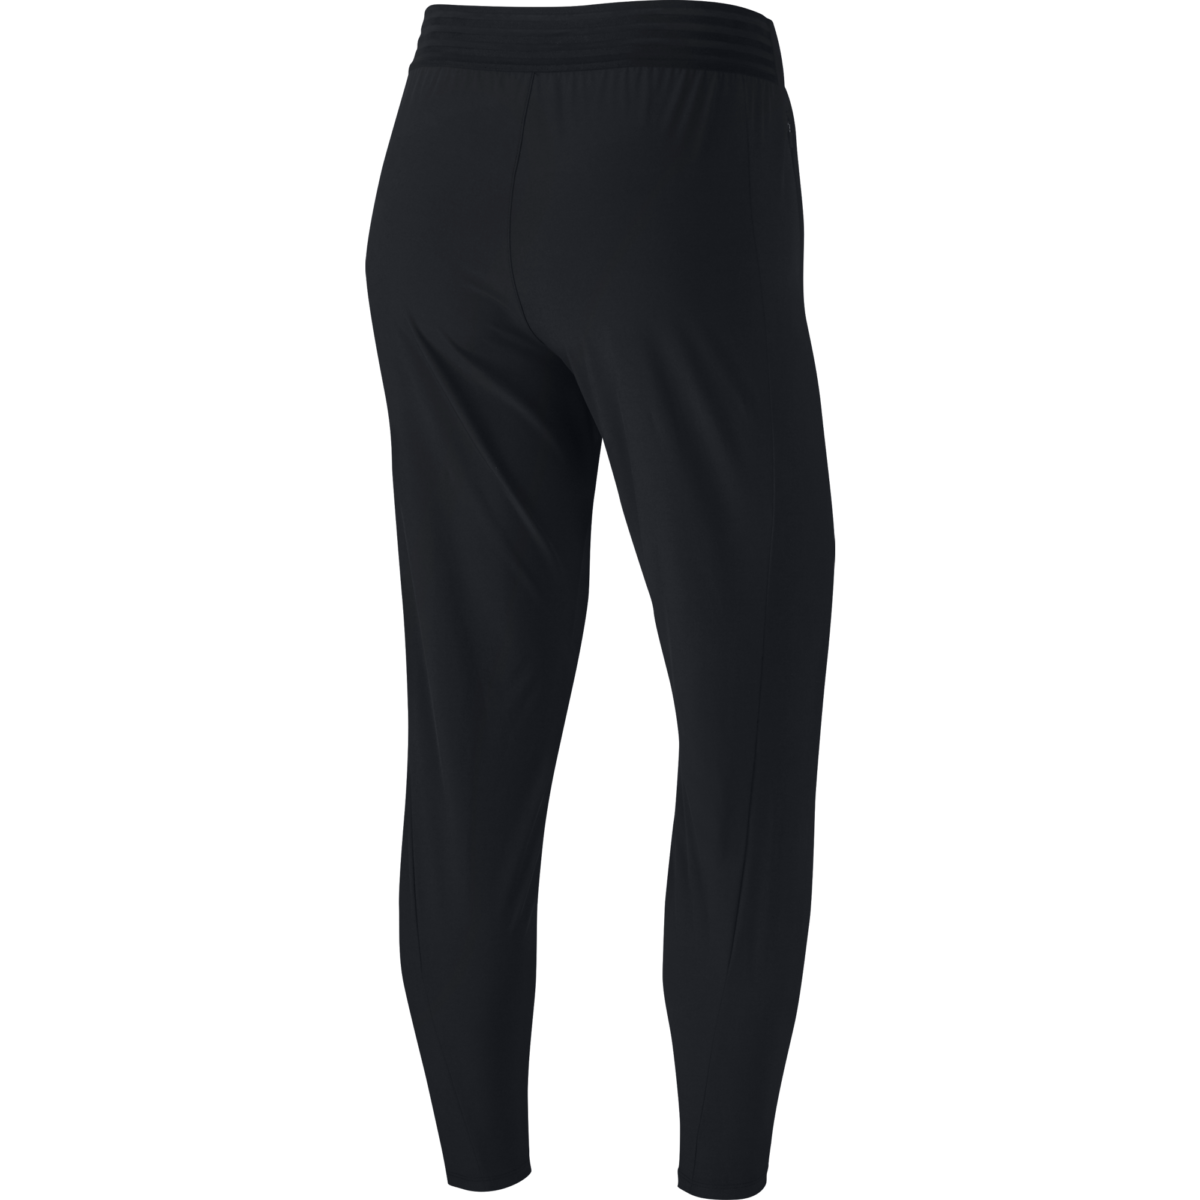 Nike Essential 7/8 Running Pants Women's Size S Black - for sale